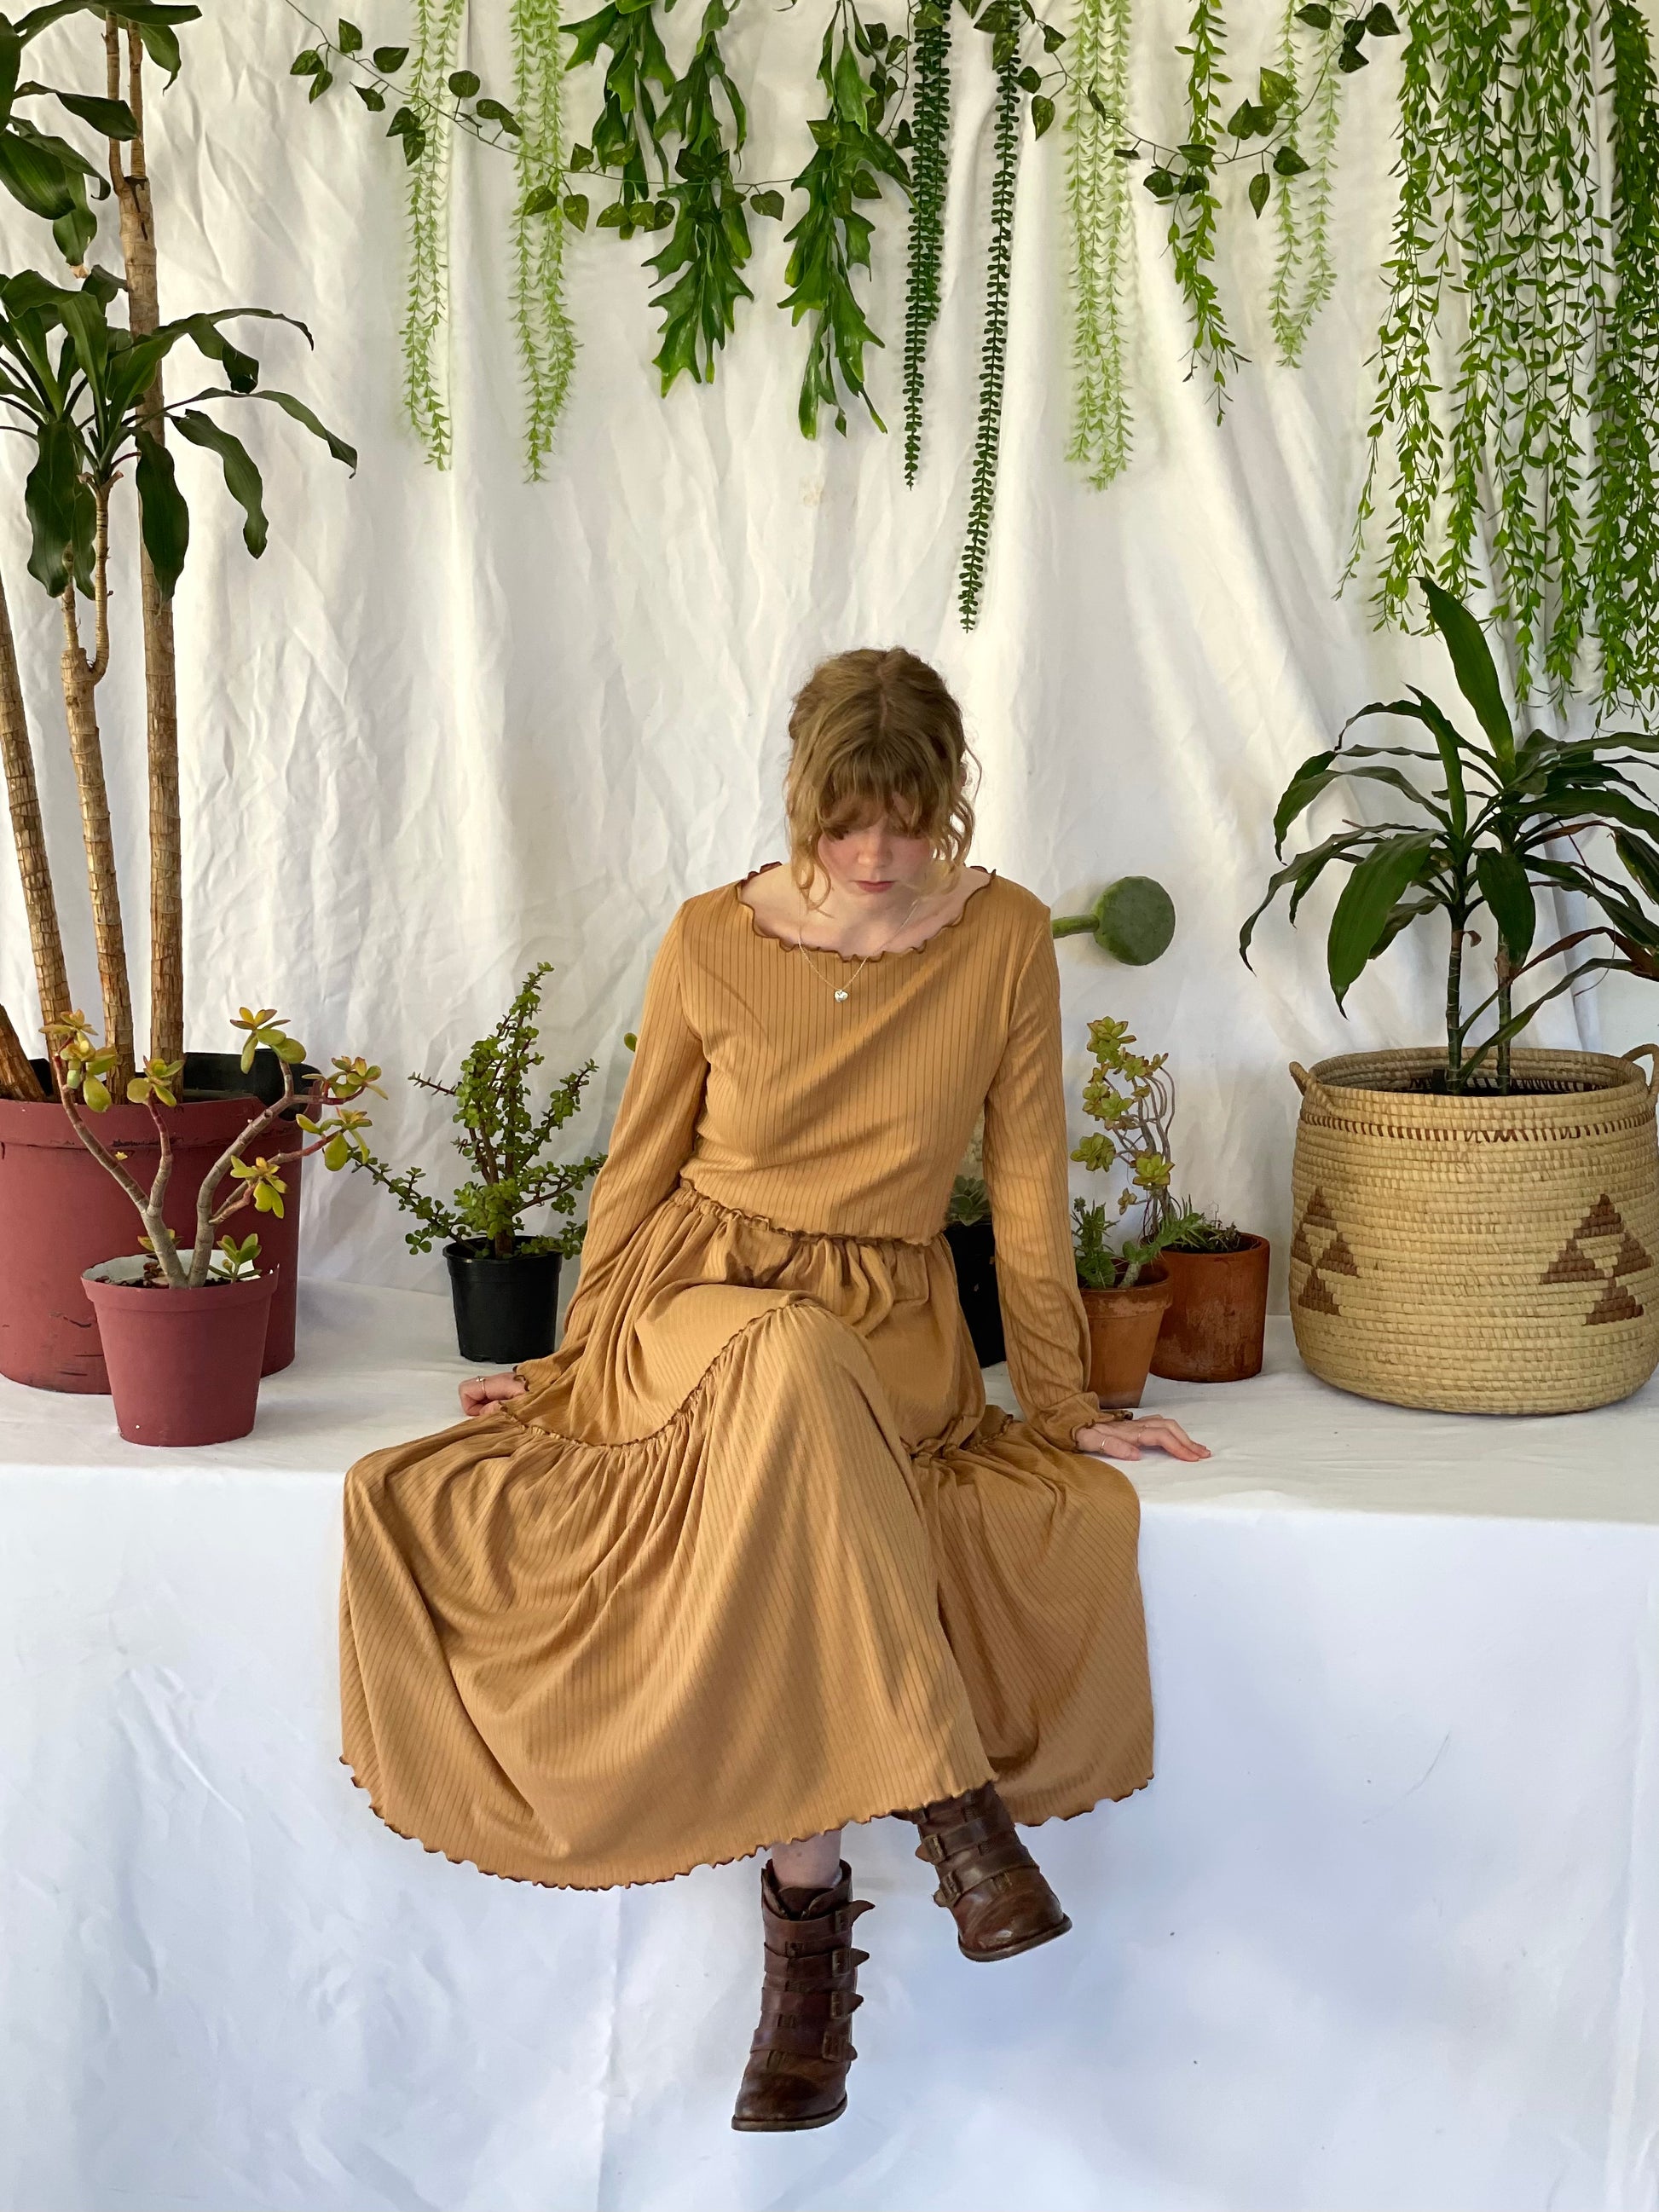 Model wears matching skirt and top set with brown boots. The model stands in front of a white backdrop with pot plants. 